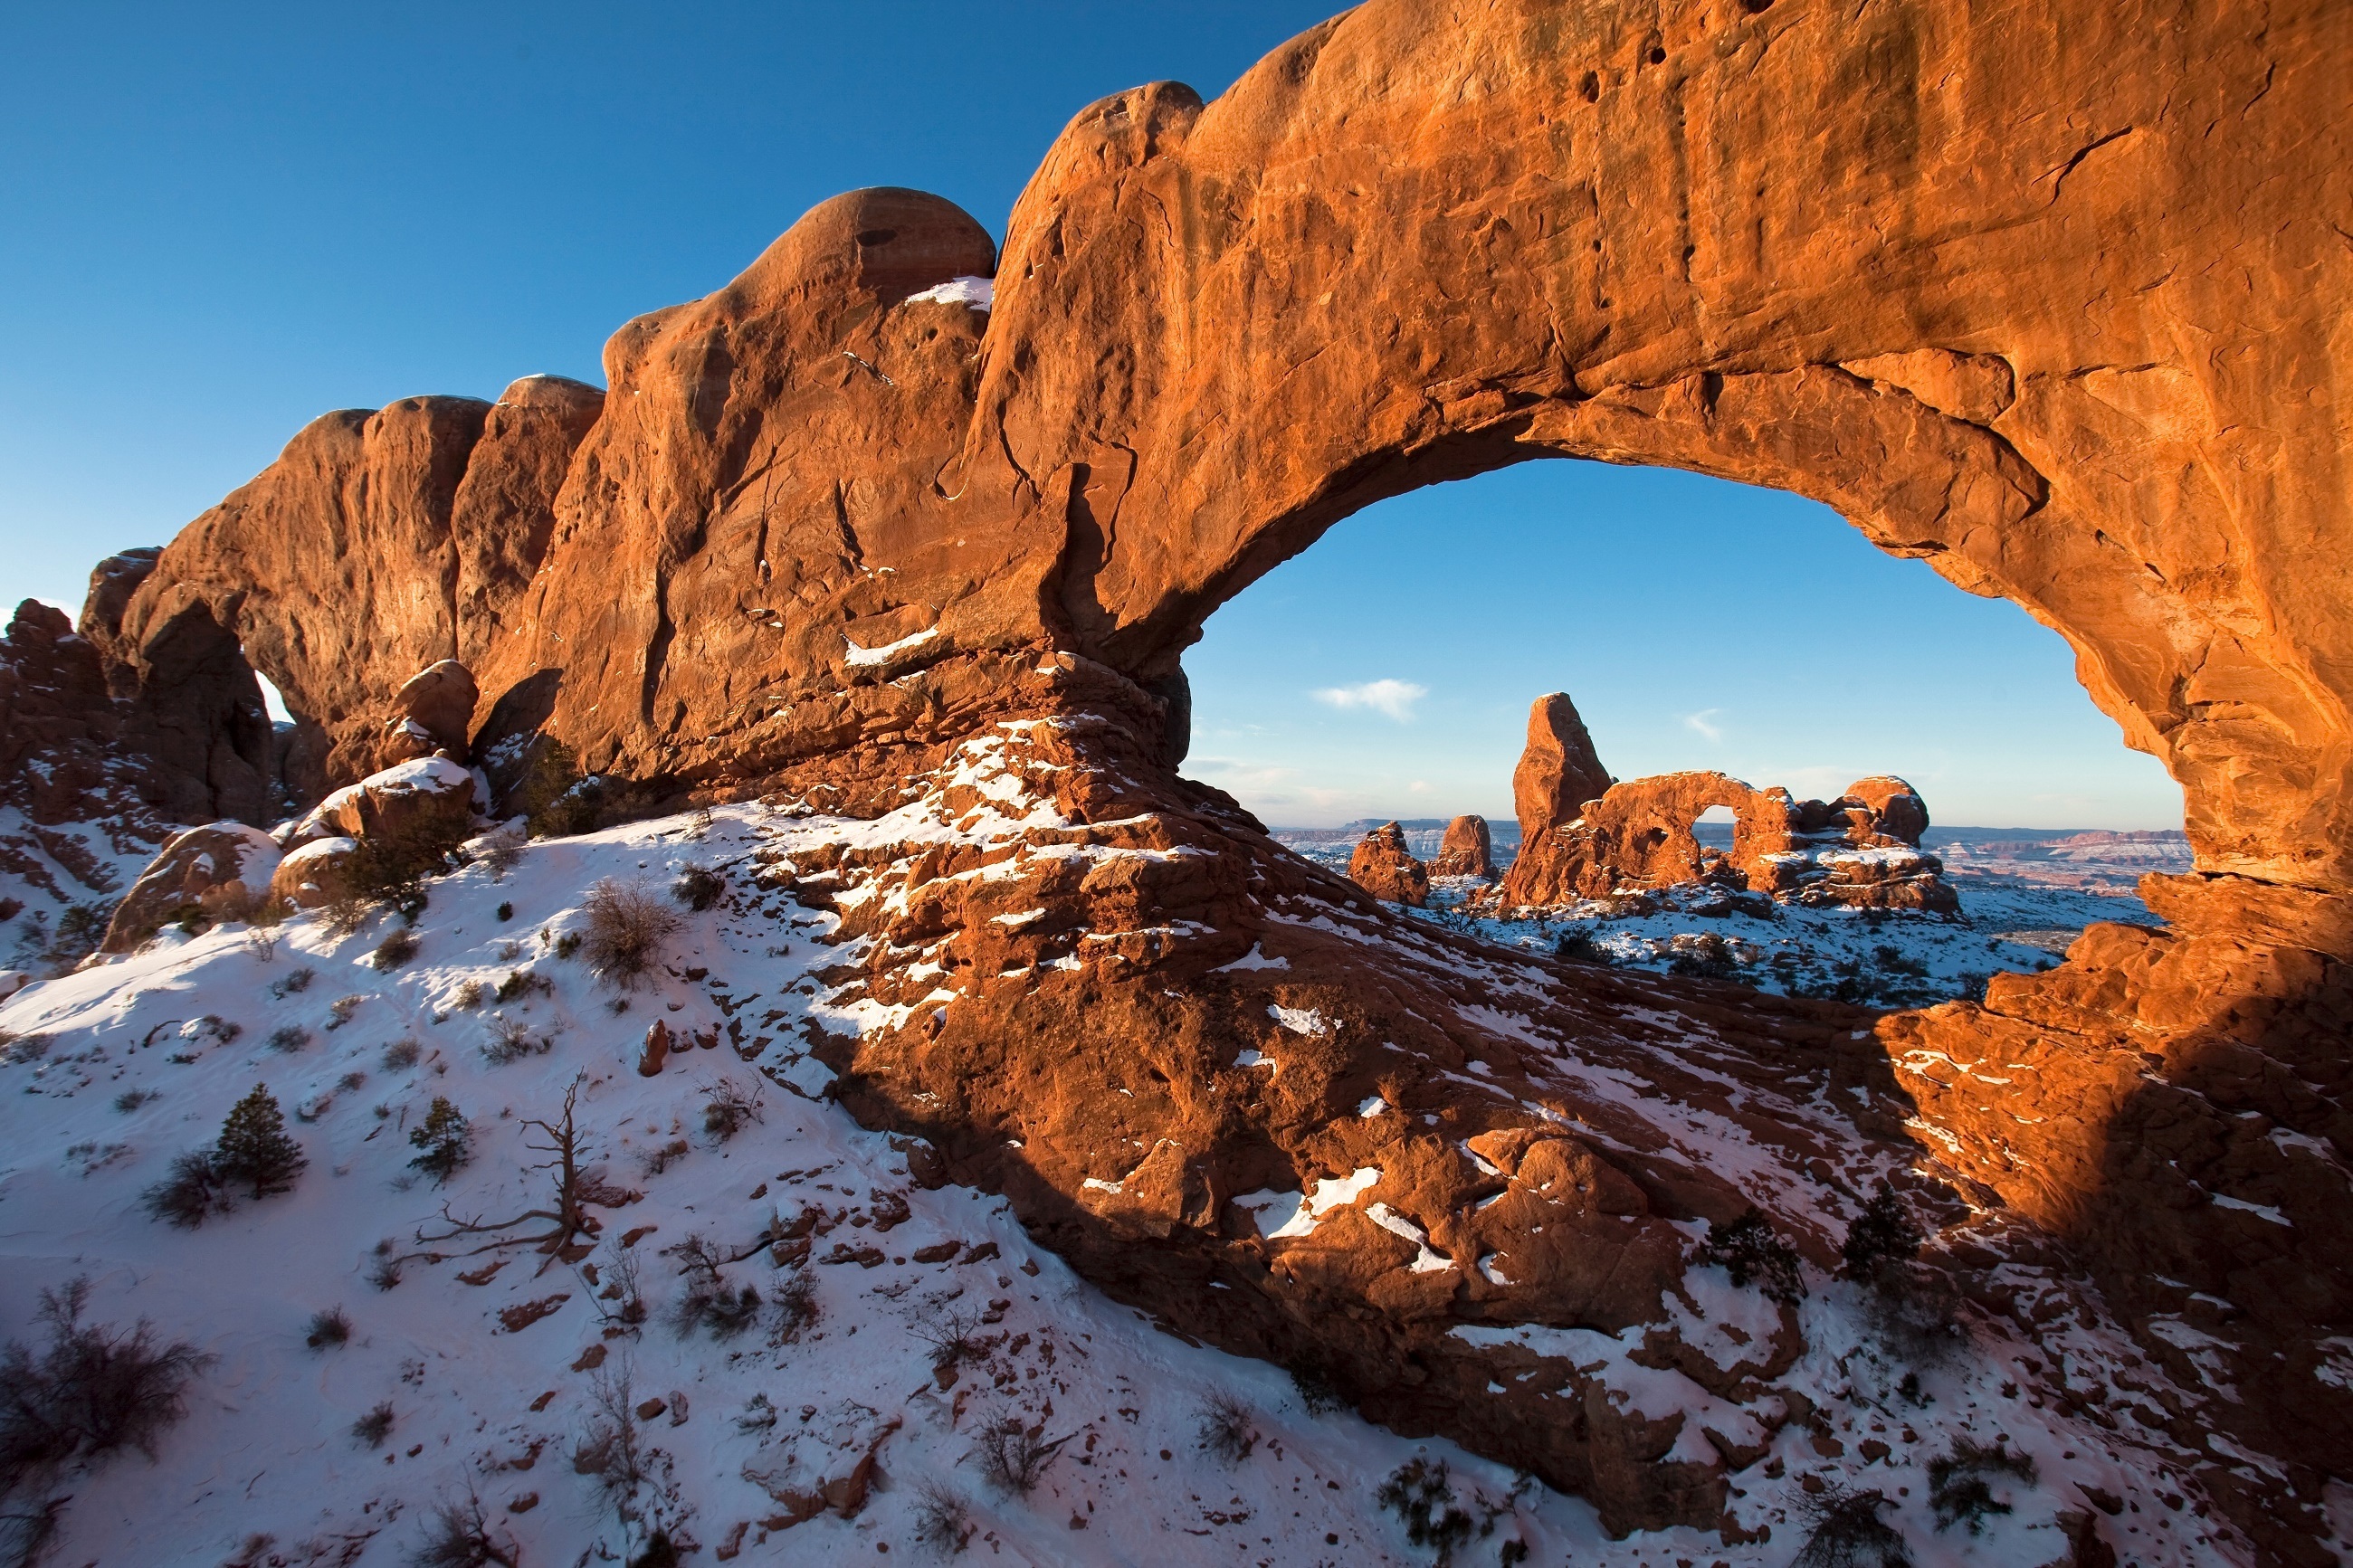 Turret Arch in arches national park  Utah, U.S.A. America by skeeze